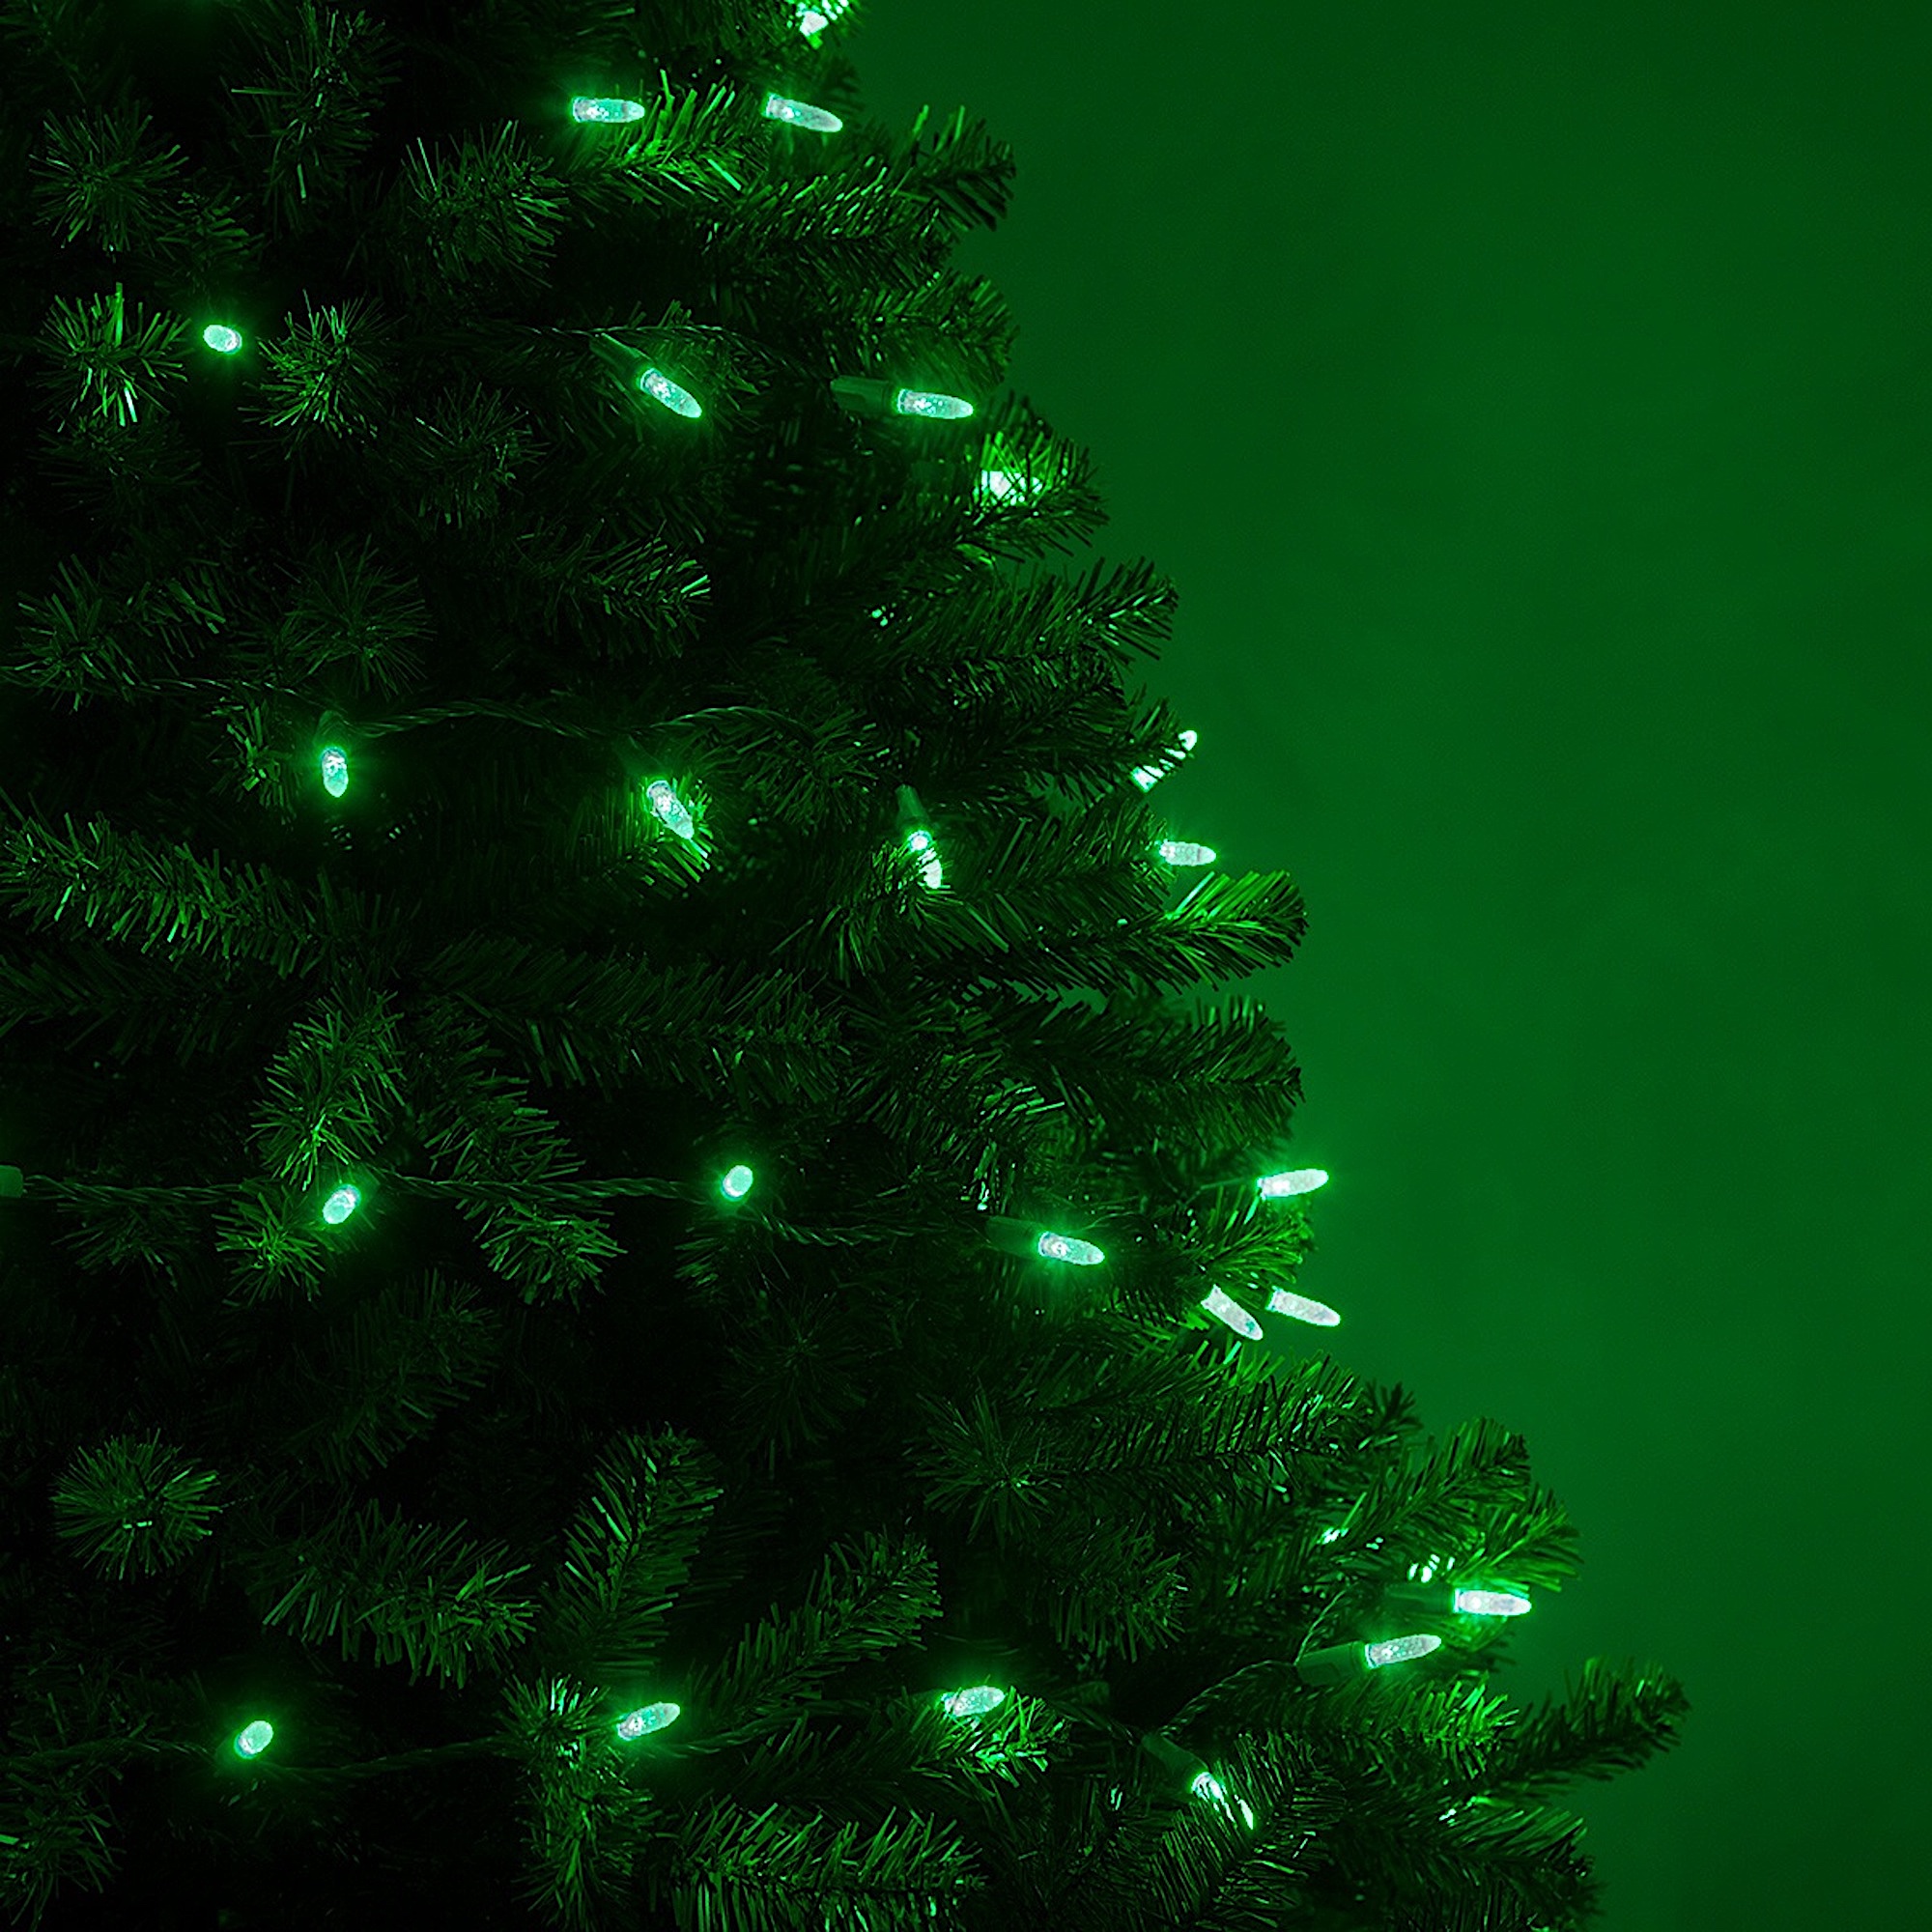 Wintergreen Lighting 70 Green LED Christmas Tree Lights, 4" Spacing, 24', Faceted String Lights for Holiday Party St. Patrick’s Day Decoration - image 5 of 8